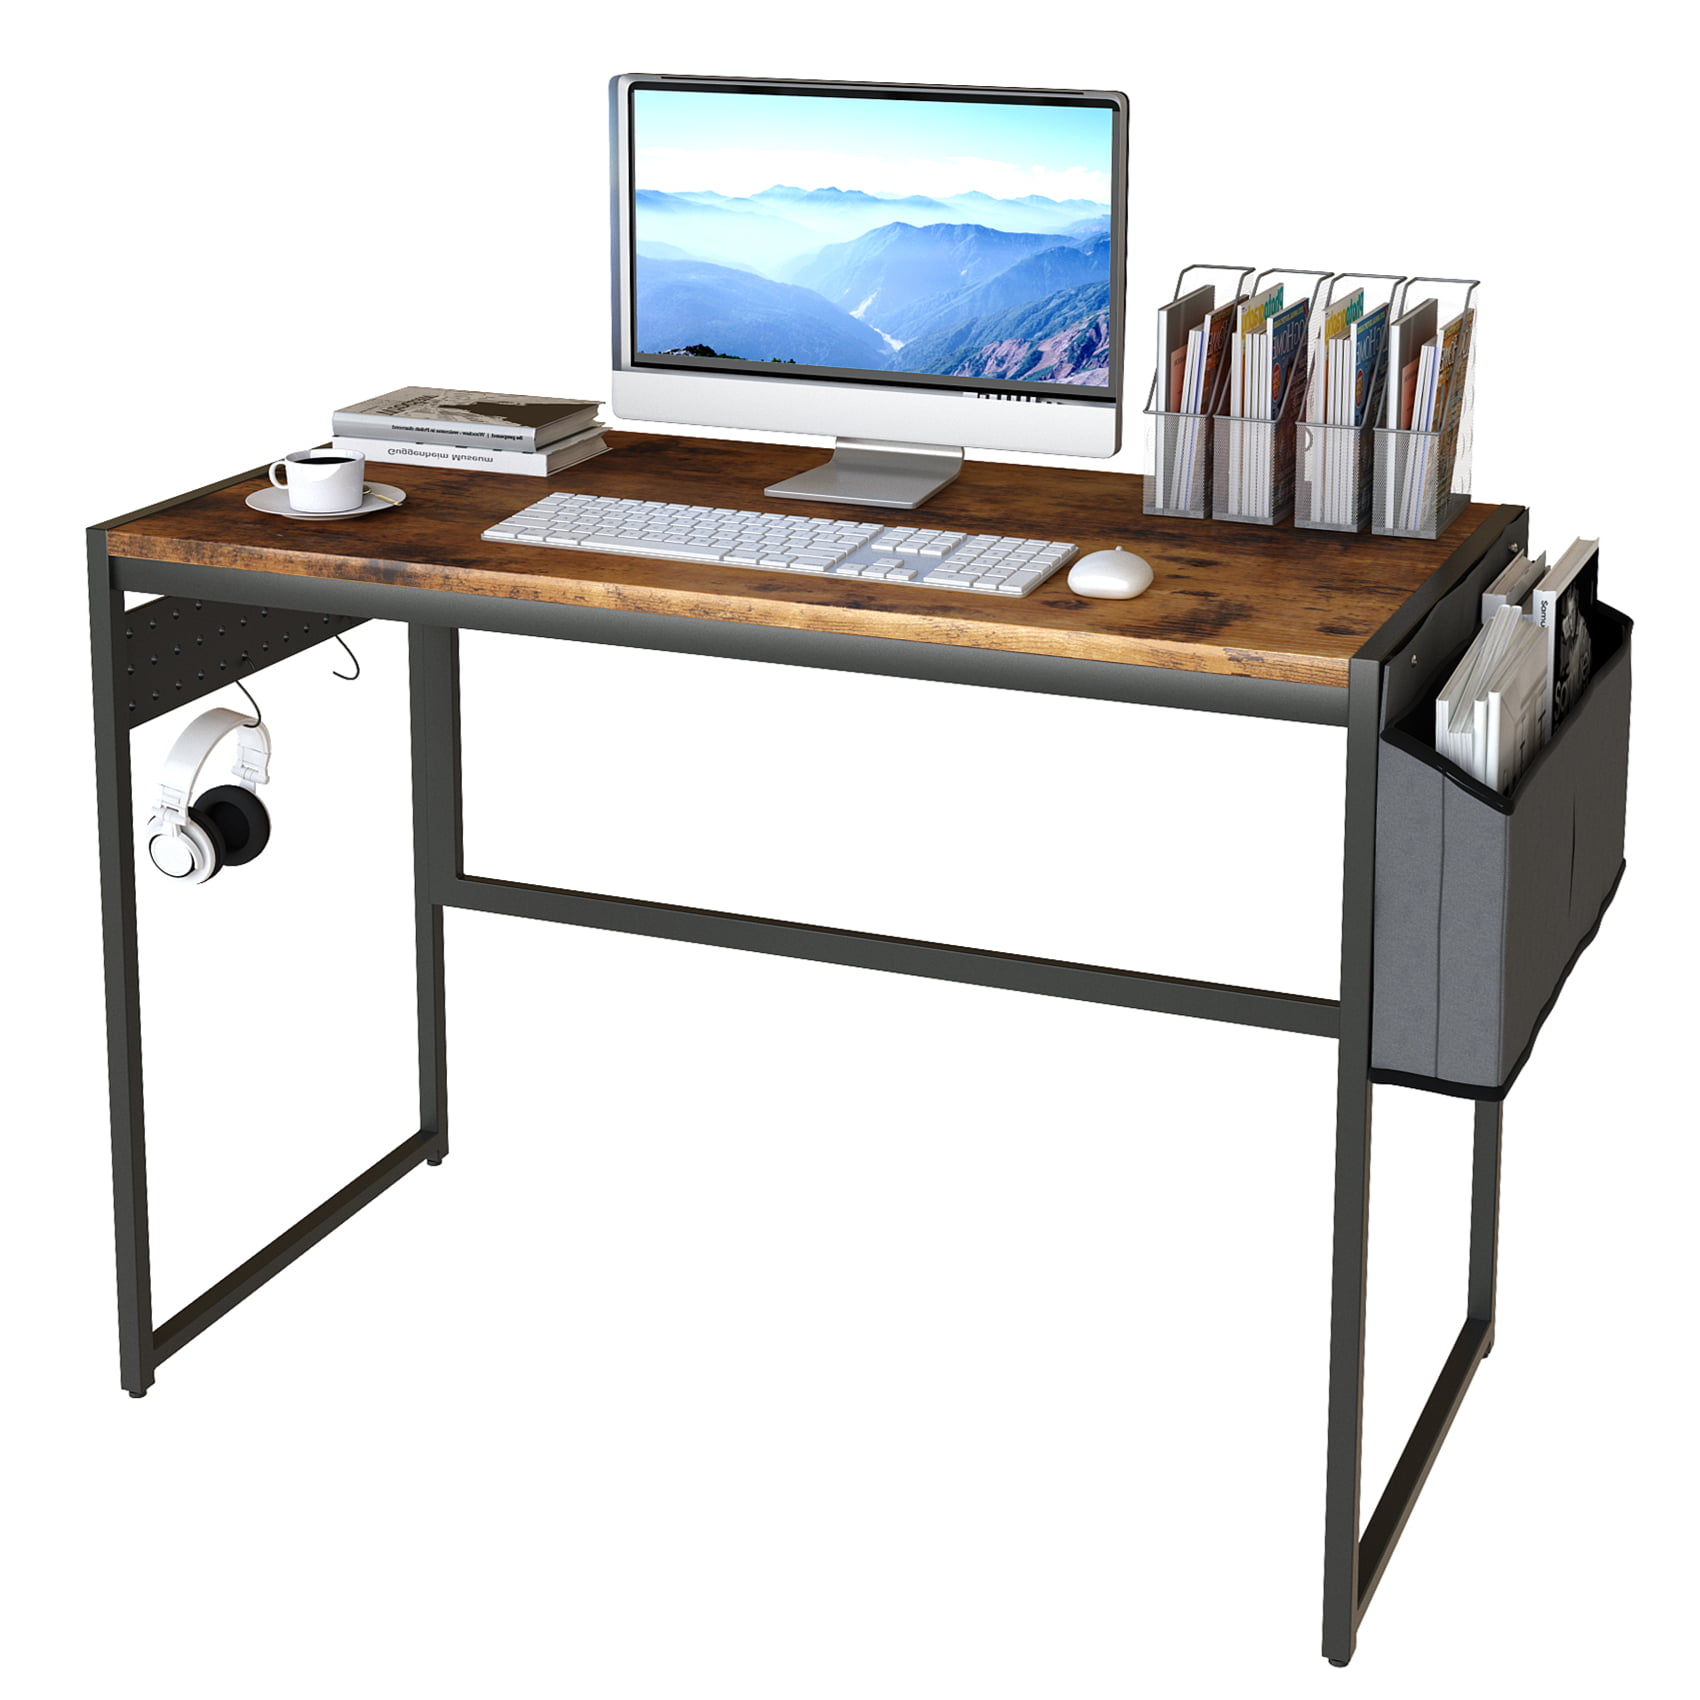 Rustic Study Writing Desk Laptop Table Workstation for Home Office 39 Inch Home Office Desk for Small Space Rustic Brown FELLYTN Small Computer Desk with Shelves